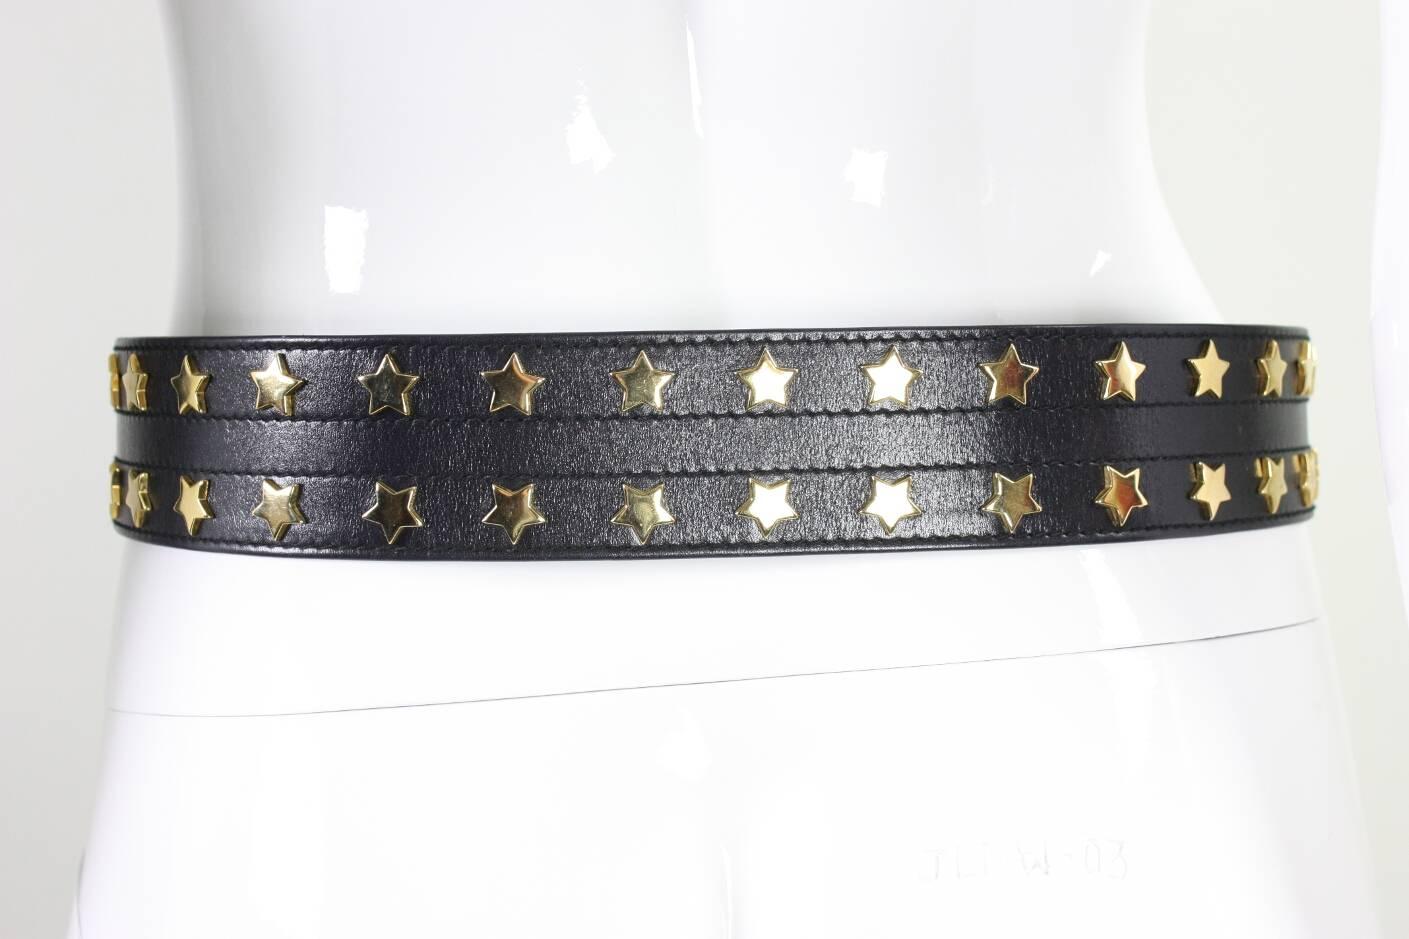 Vintage belt from Escada likely dates to the 1980's and is made of soft black leather with gold-toned stars.  Made in Italy.

Labeled a size 40.

Measurements:
Waist Length: 31-33